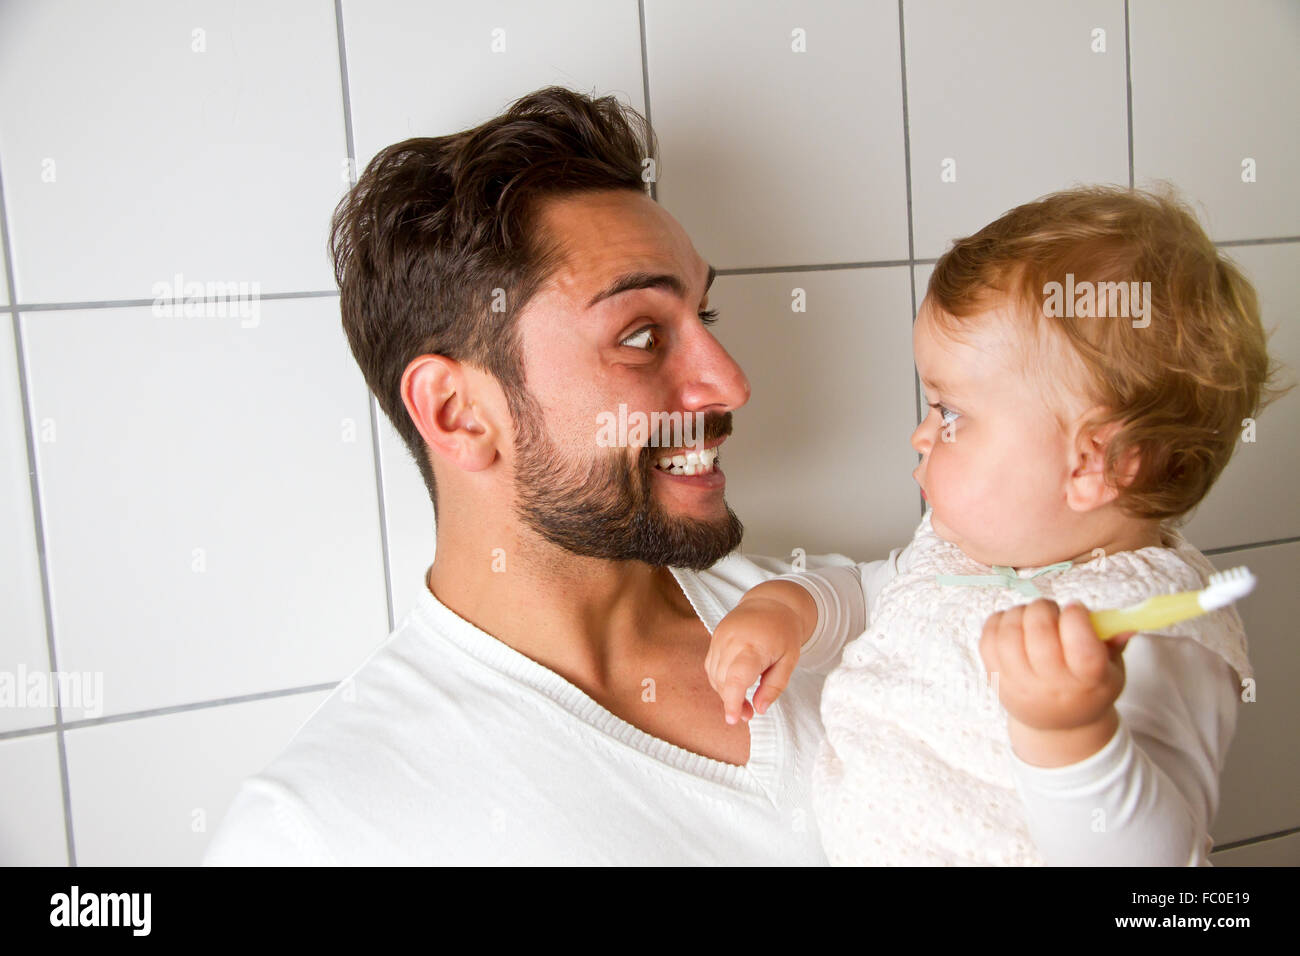 Vater with child in bathroom Stock Photo